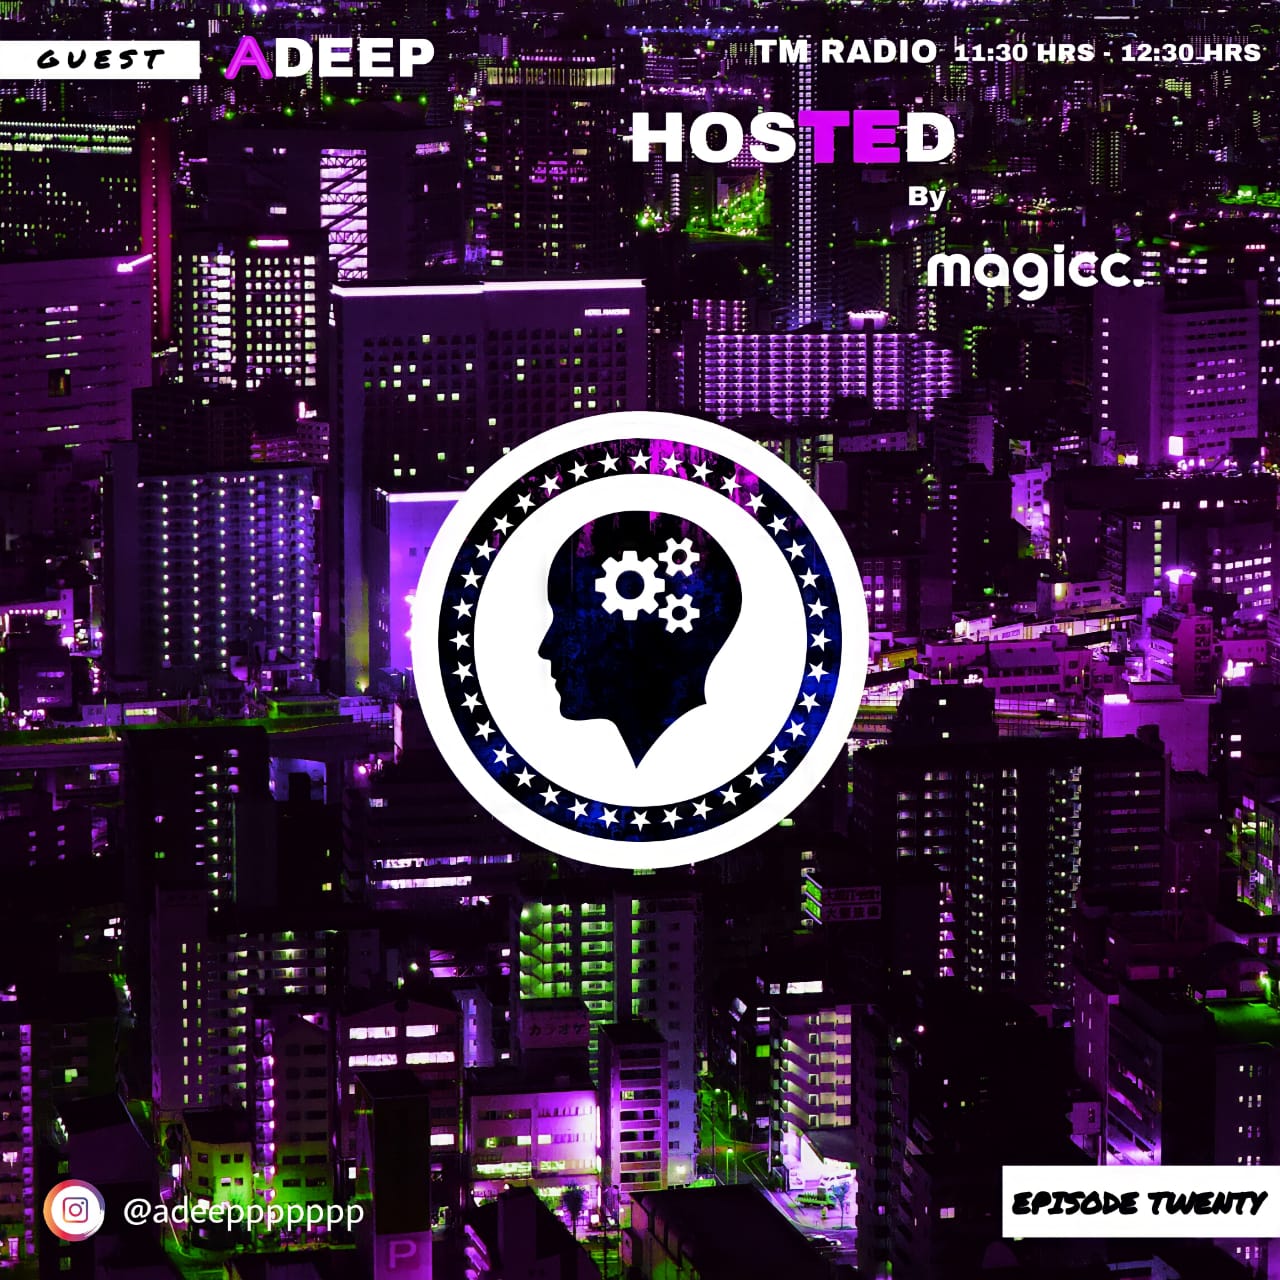 Guest mix by Adeep (from December 4th, 2020)